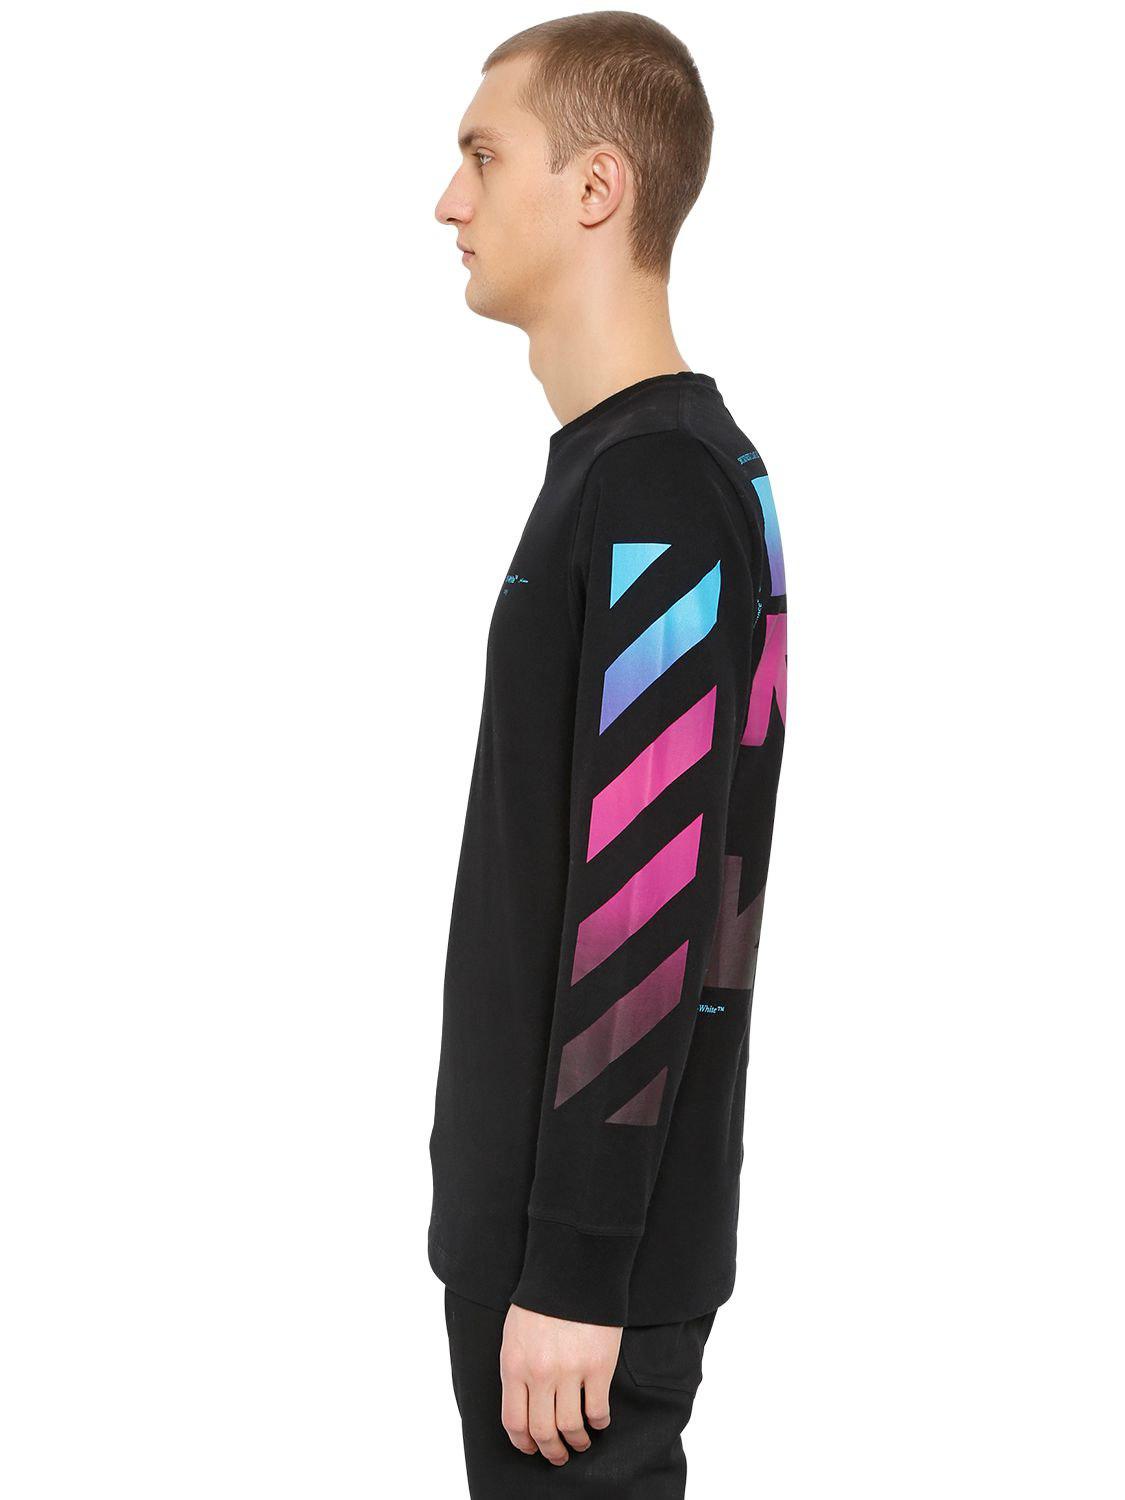 Off-White c/o Virgil Gradient Arrows Jersey T-shirt in Black for Lyst